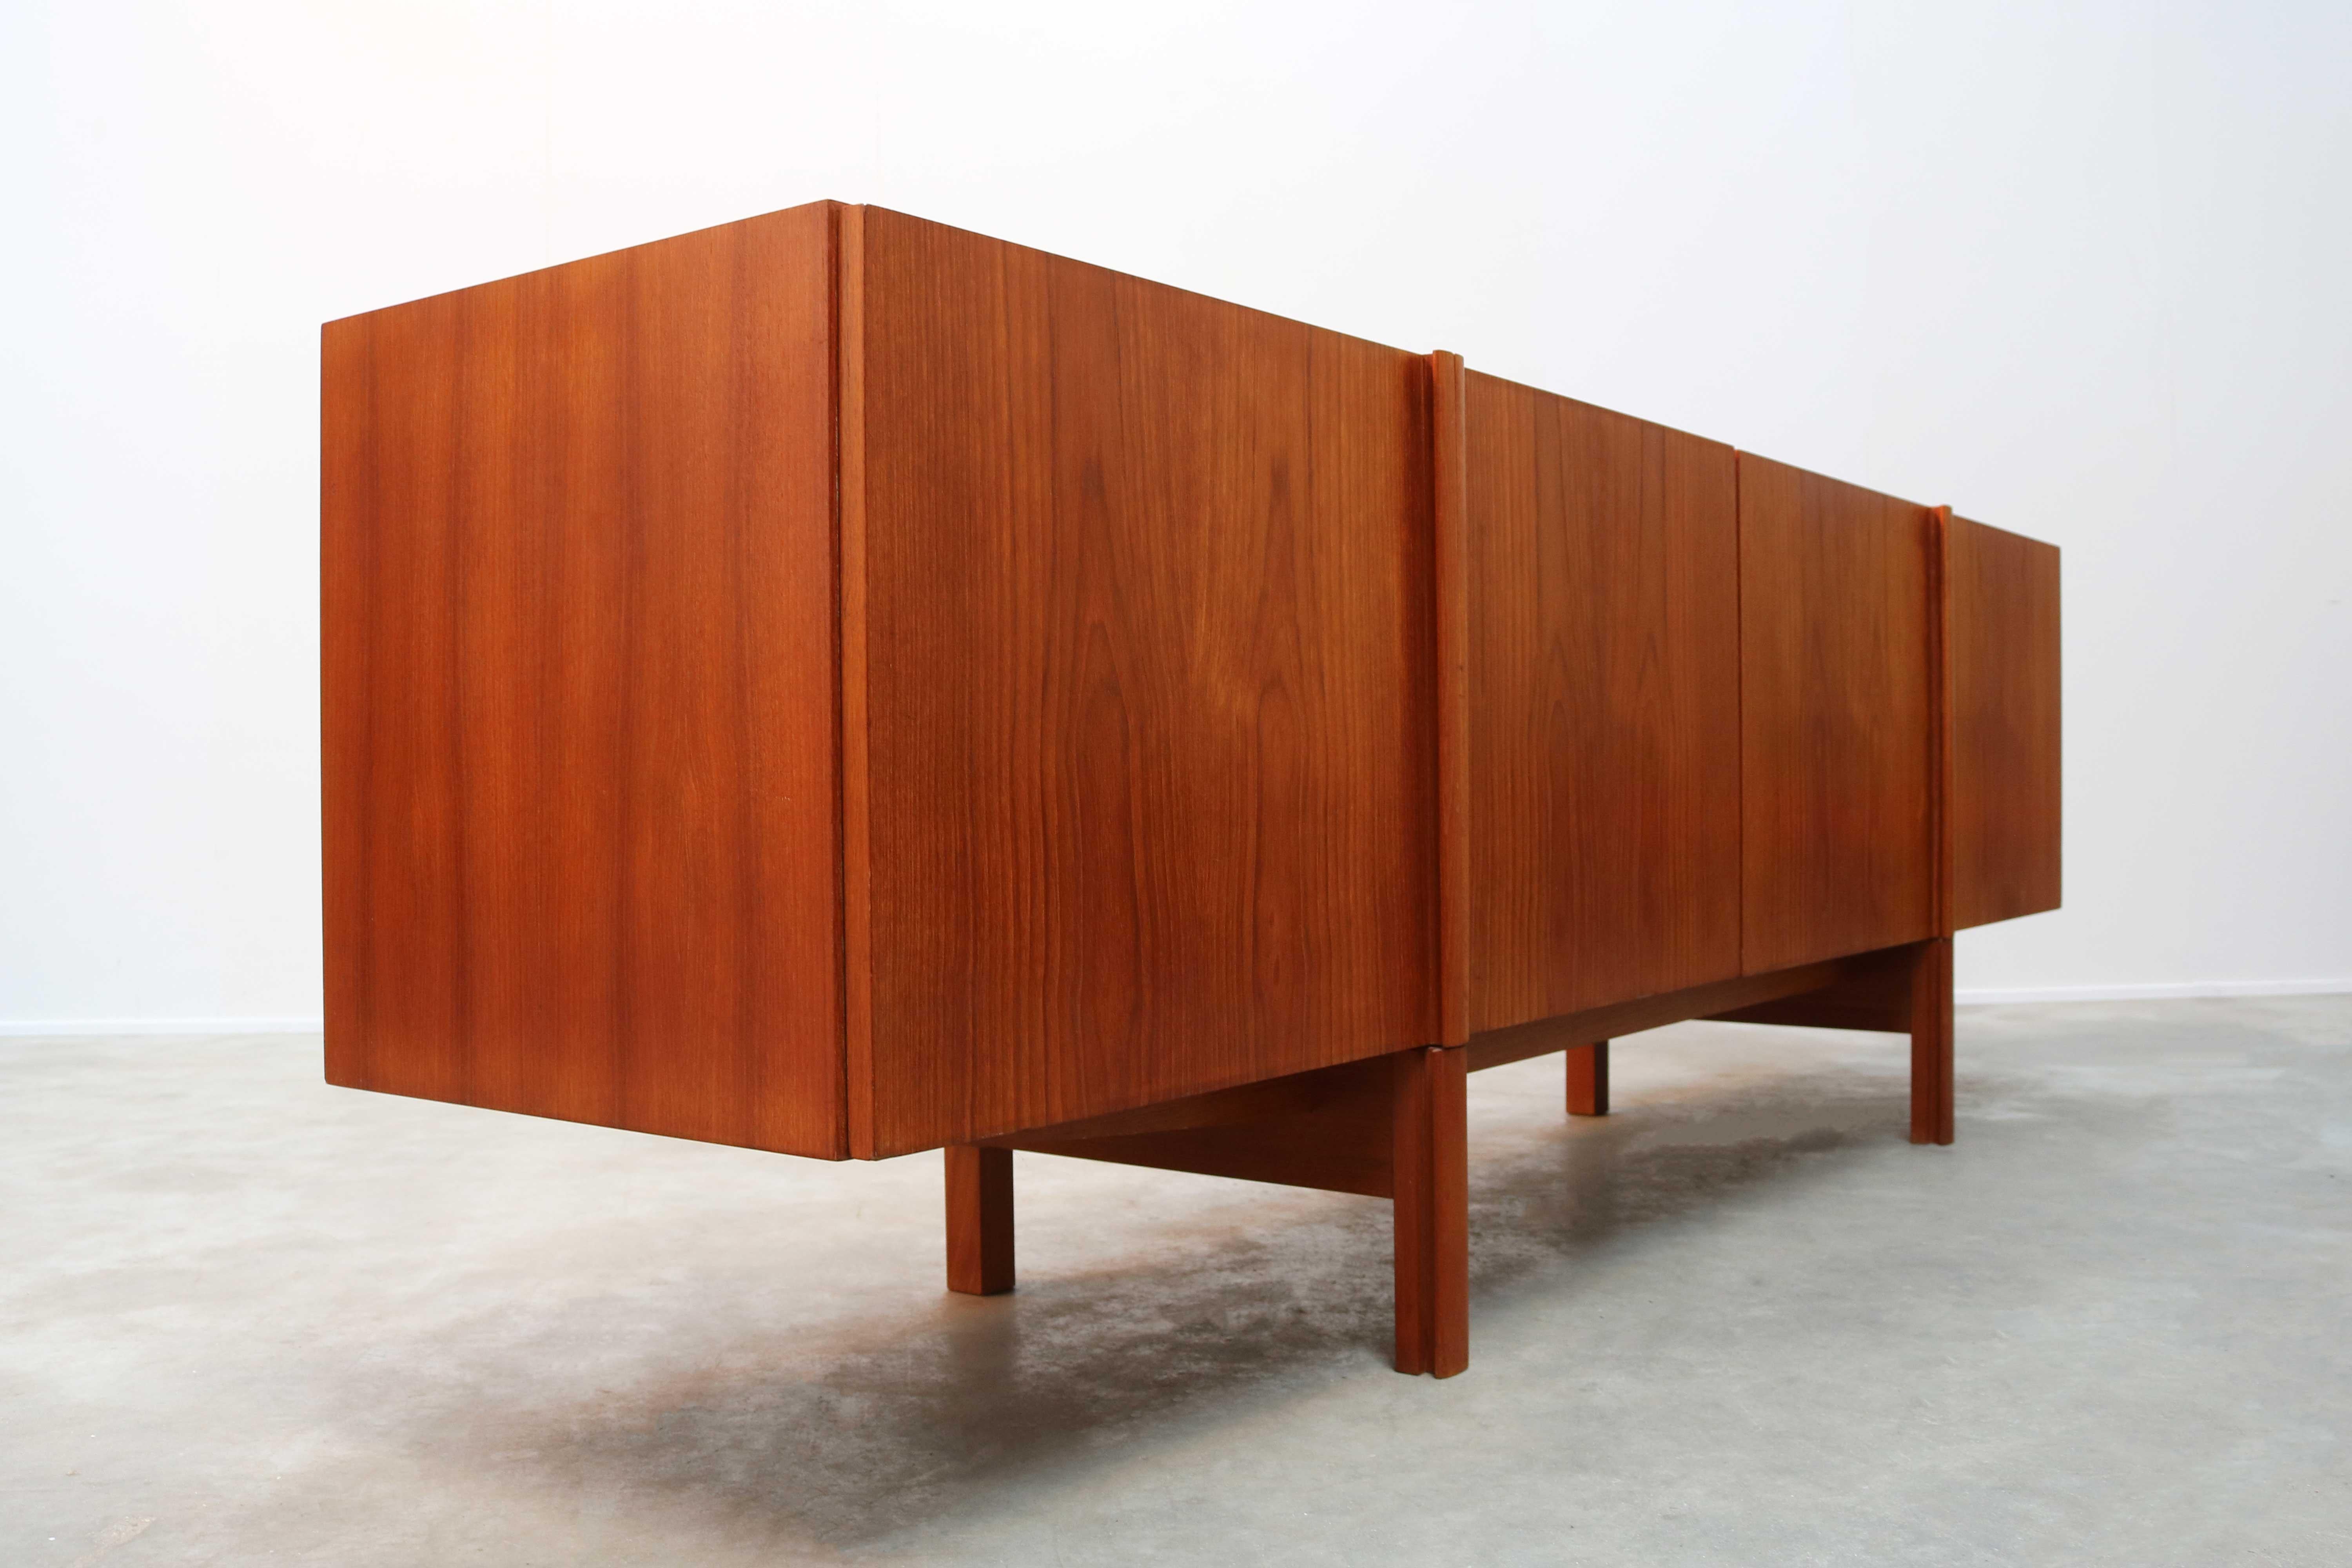 Rare Minimalist Danish design sideboard in teak by IB Kofod-Larsen for Faarup Møbelfabrik, 1960. The sideboard has a unique design that merges the legs with the door handles into a single line, resulting in a gorgeous Minimalist front. Warm and